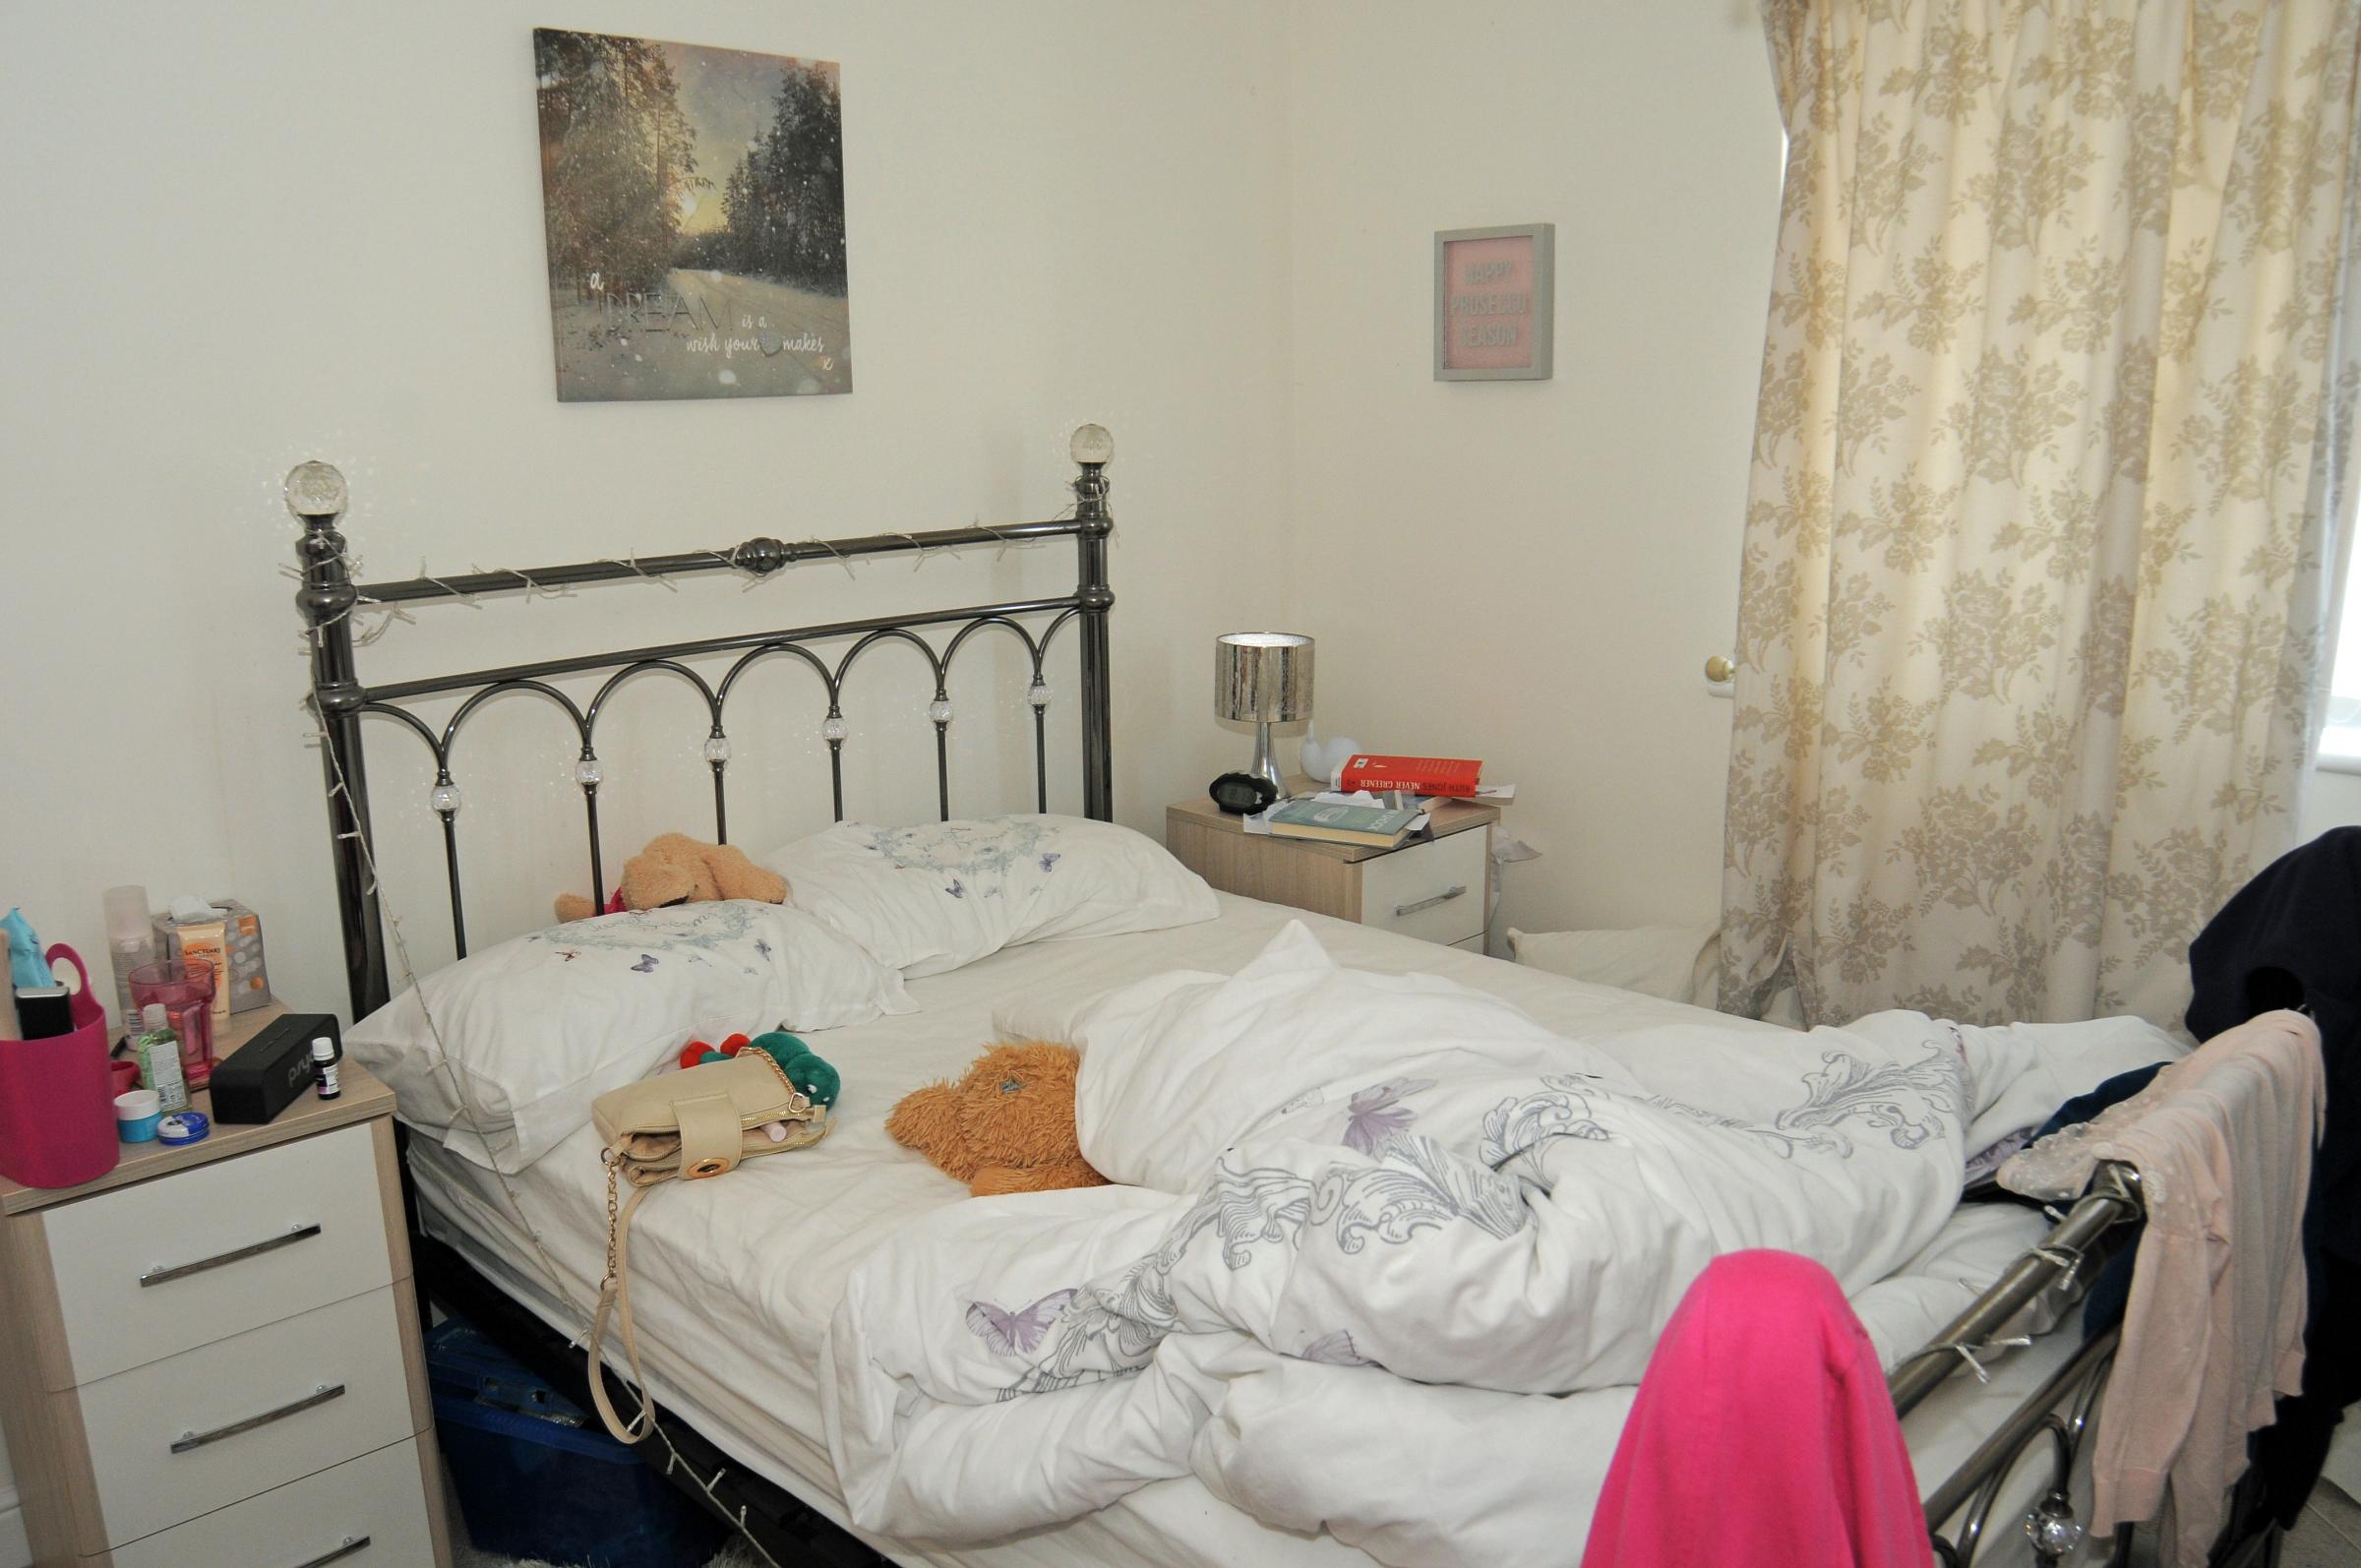 A photo of Lucy Letbys bedroom at Westbourne Road, Chester, shown in court. Picture: Cheshire Constabulary/CPS.